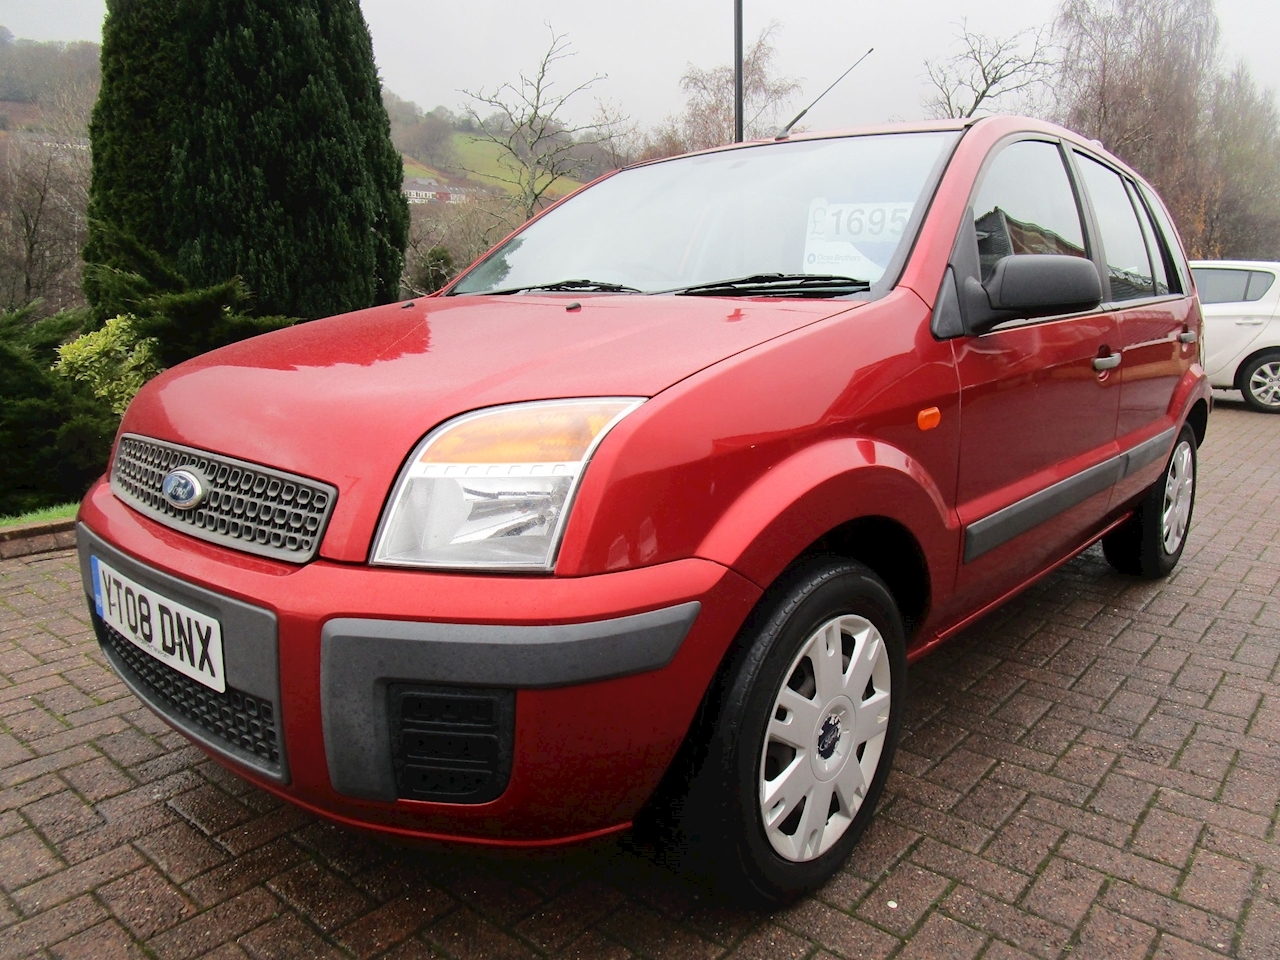 Fusion Style Climate 1.4 5dr Hatchback Manual Diesel